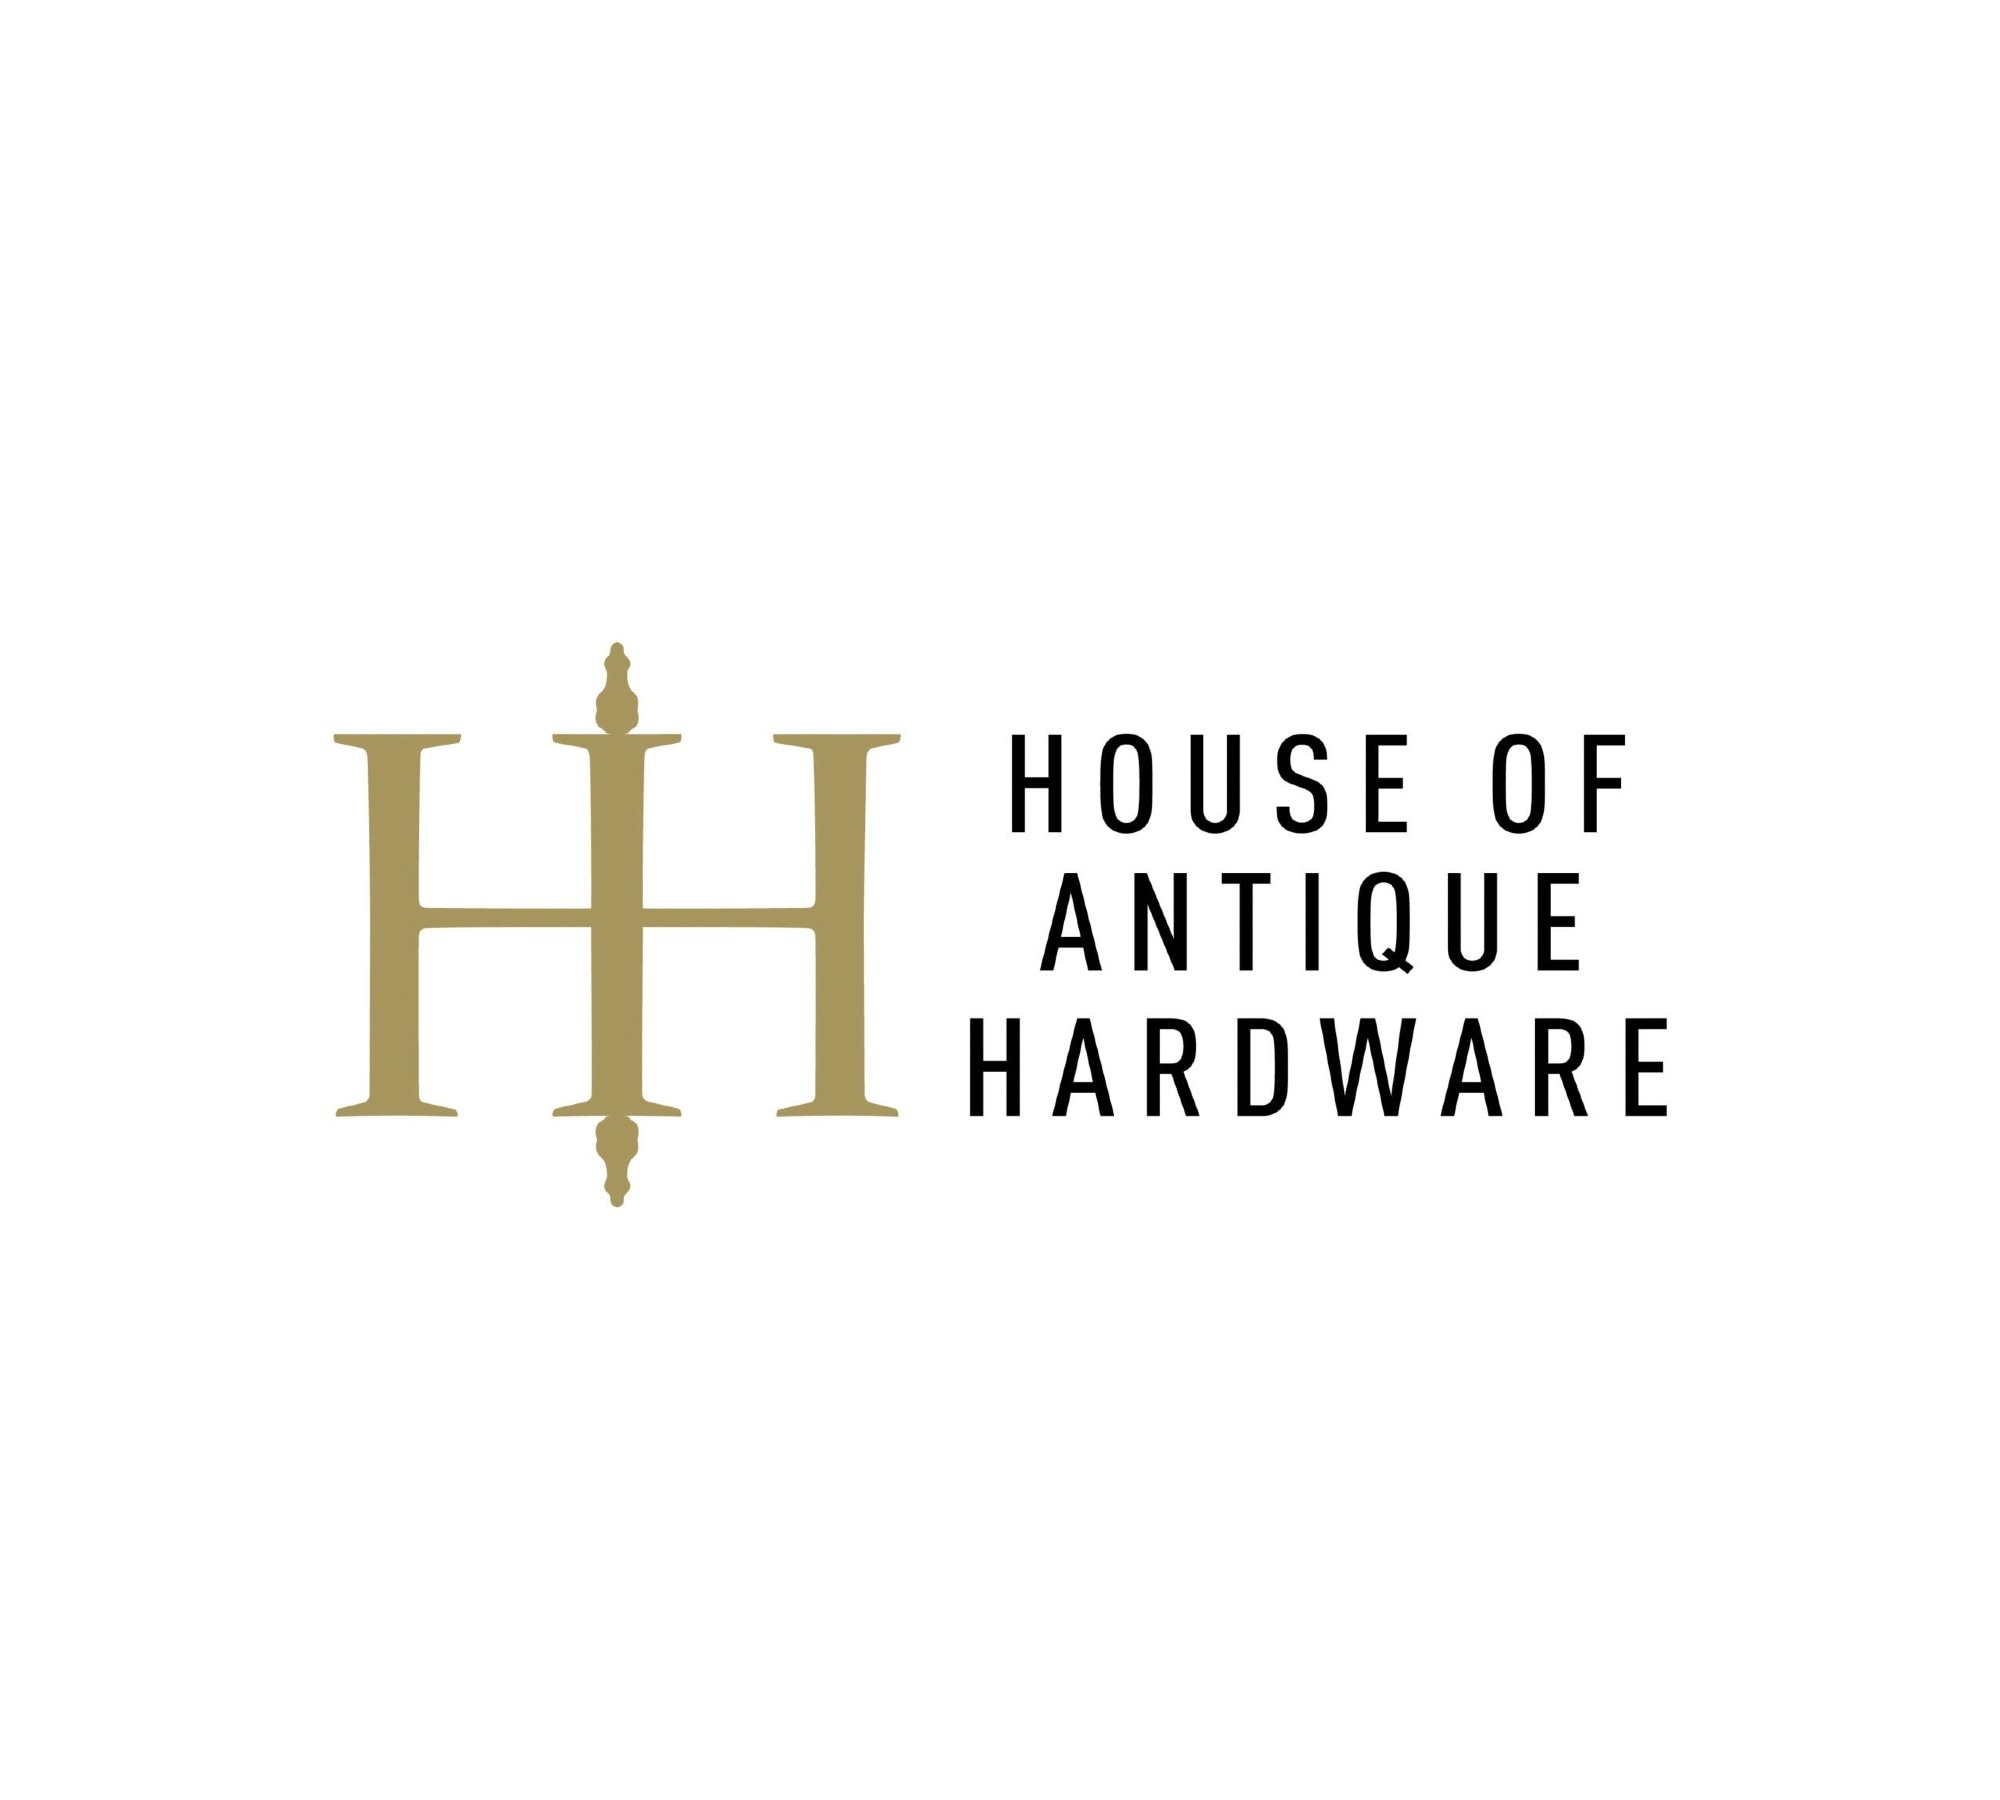 House of Antique Hardware